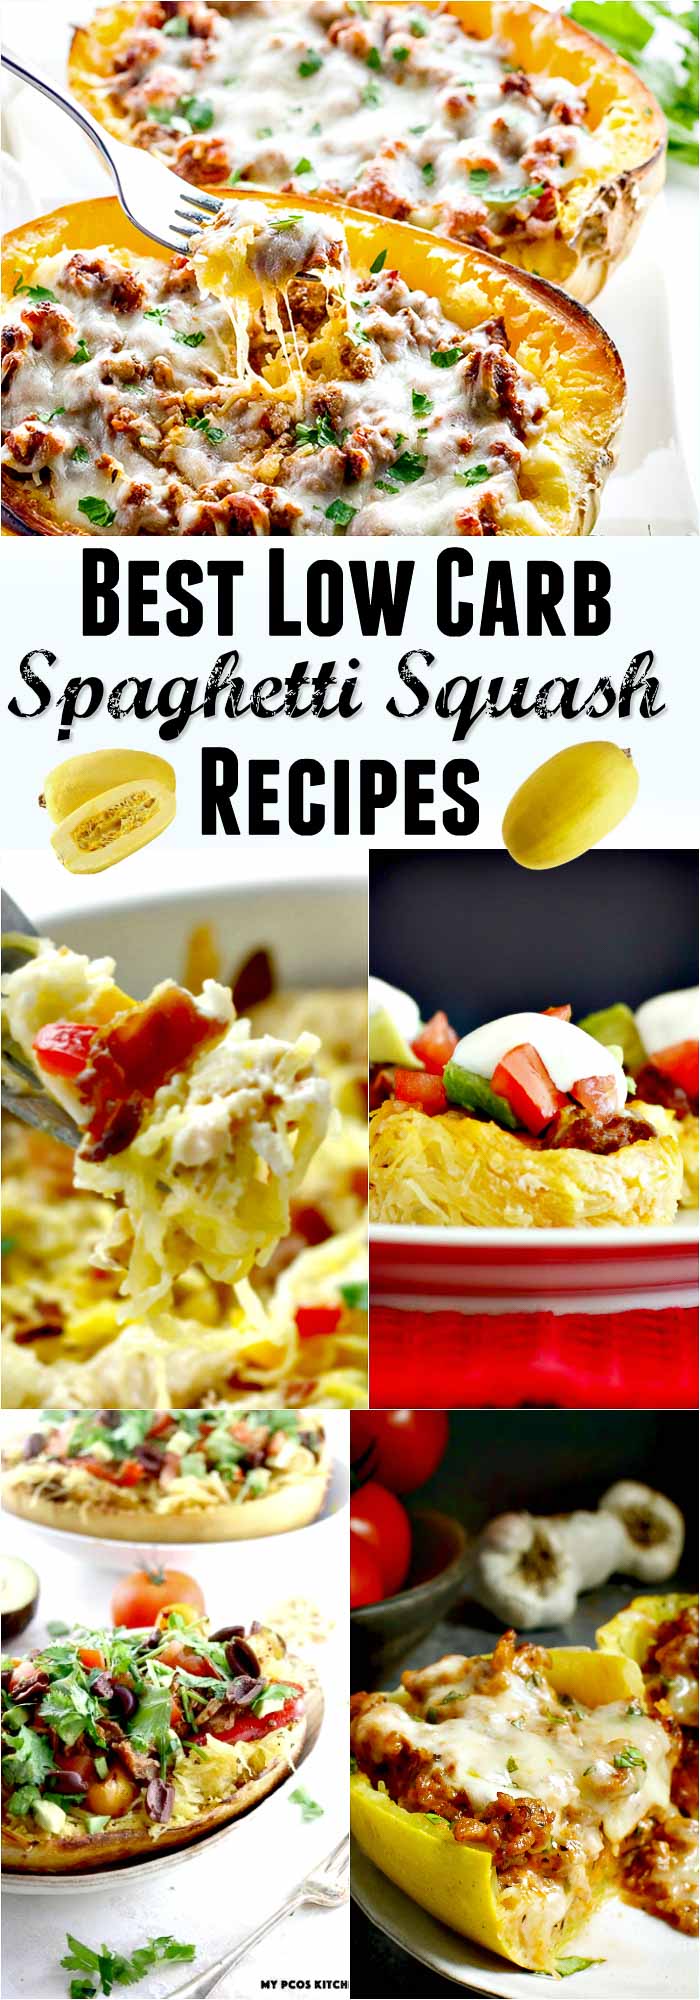 Best Low Carb Spaghetti Squash Recipe Collection